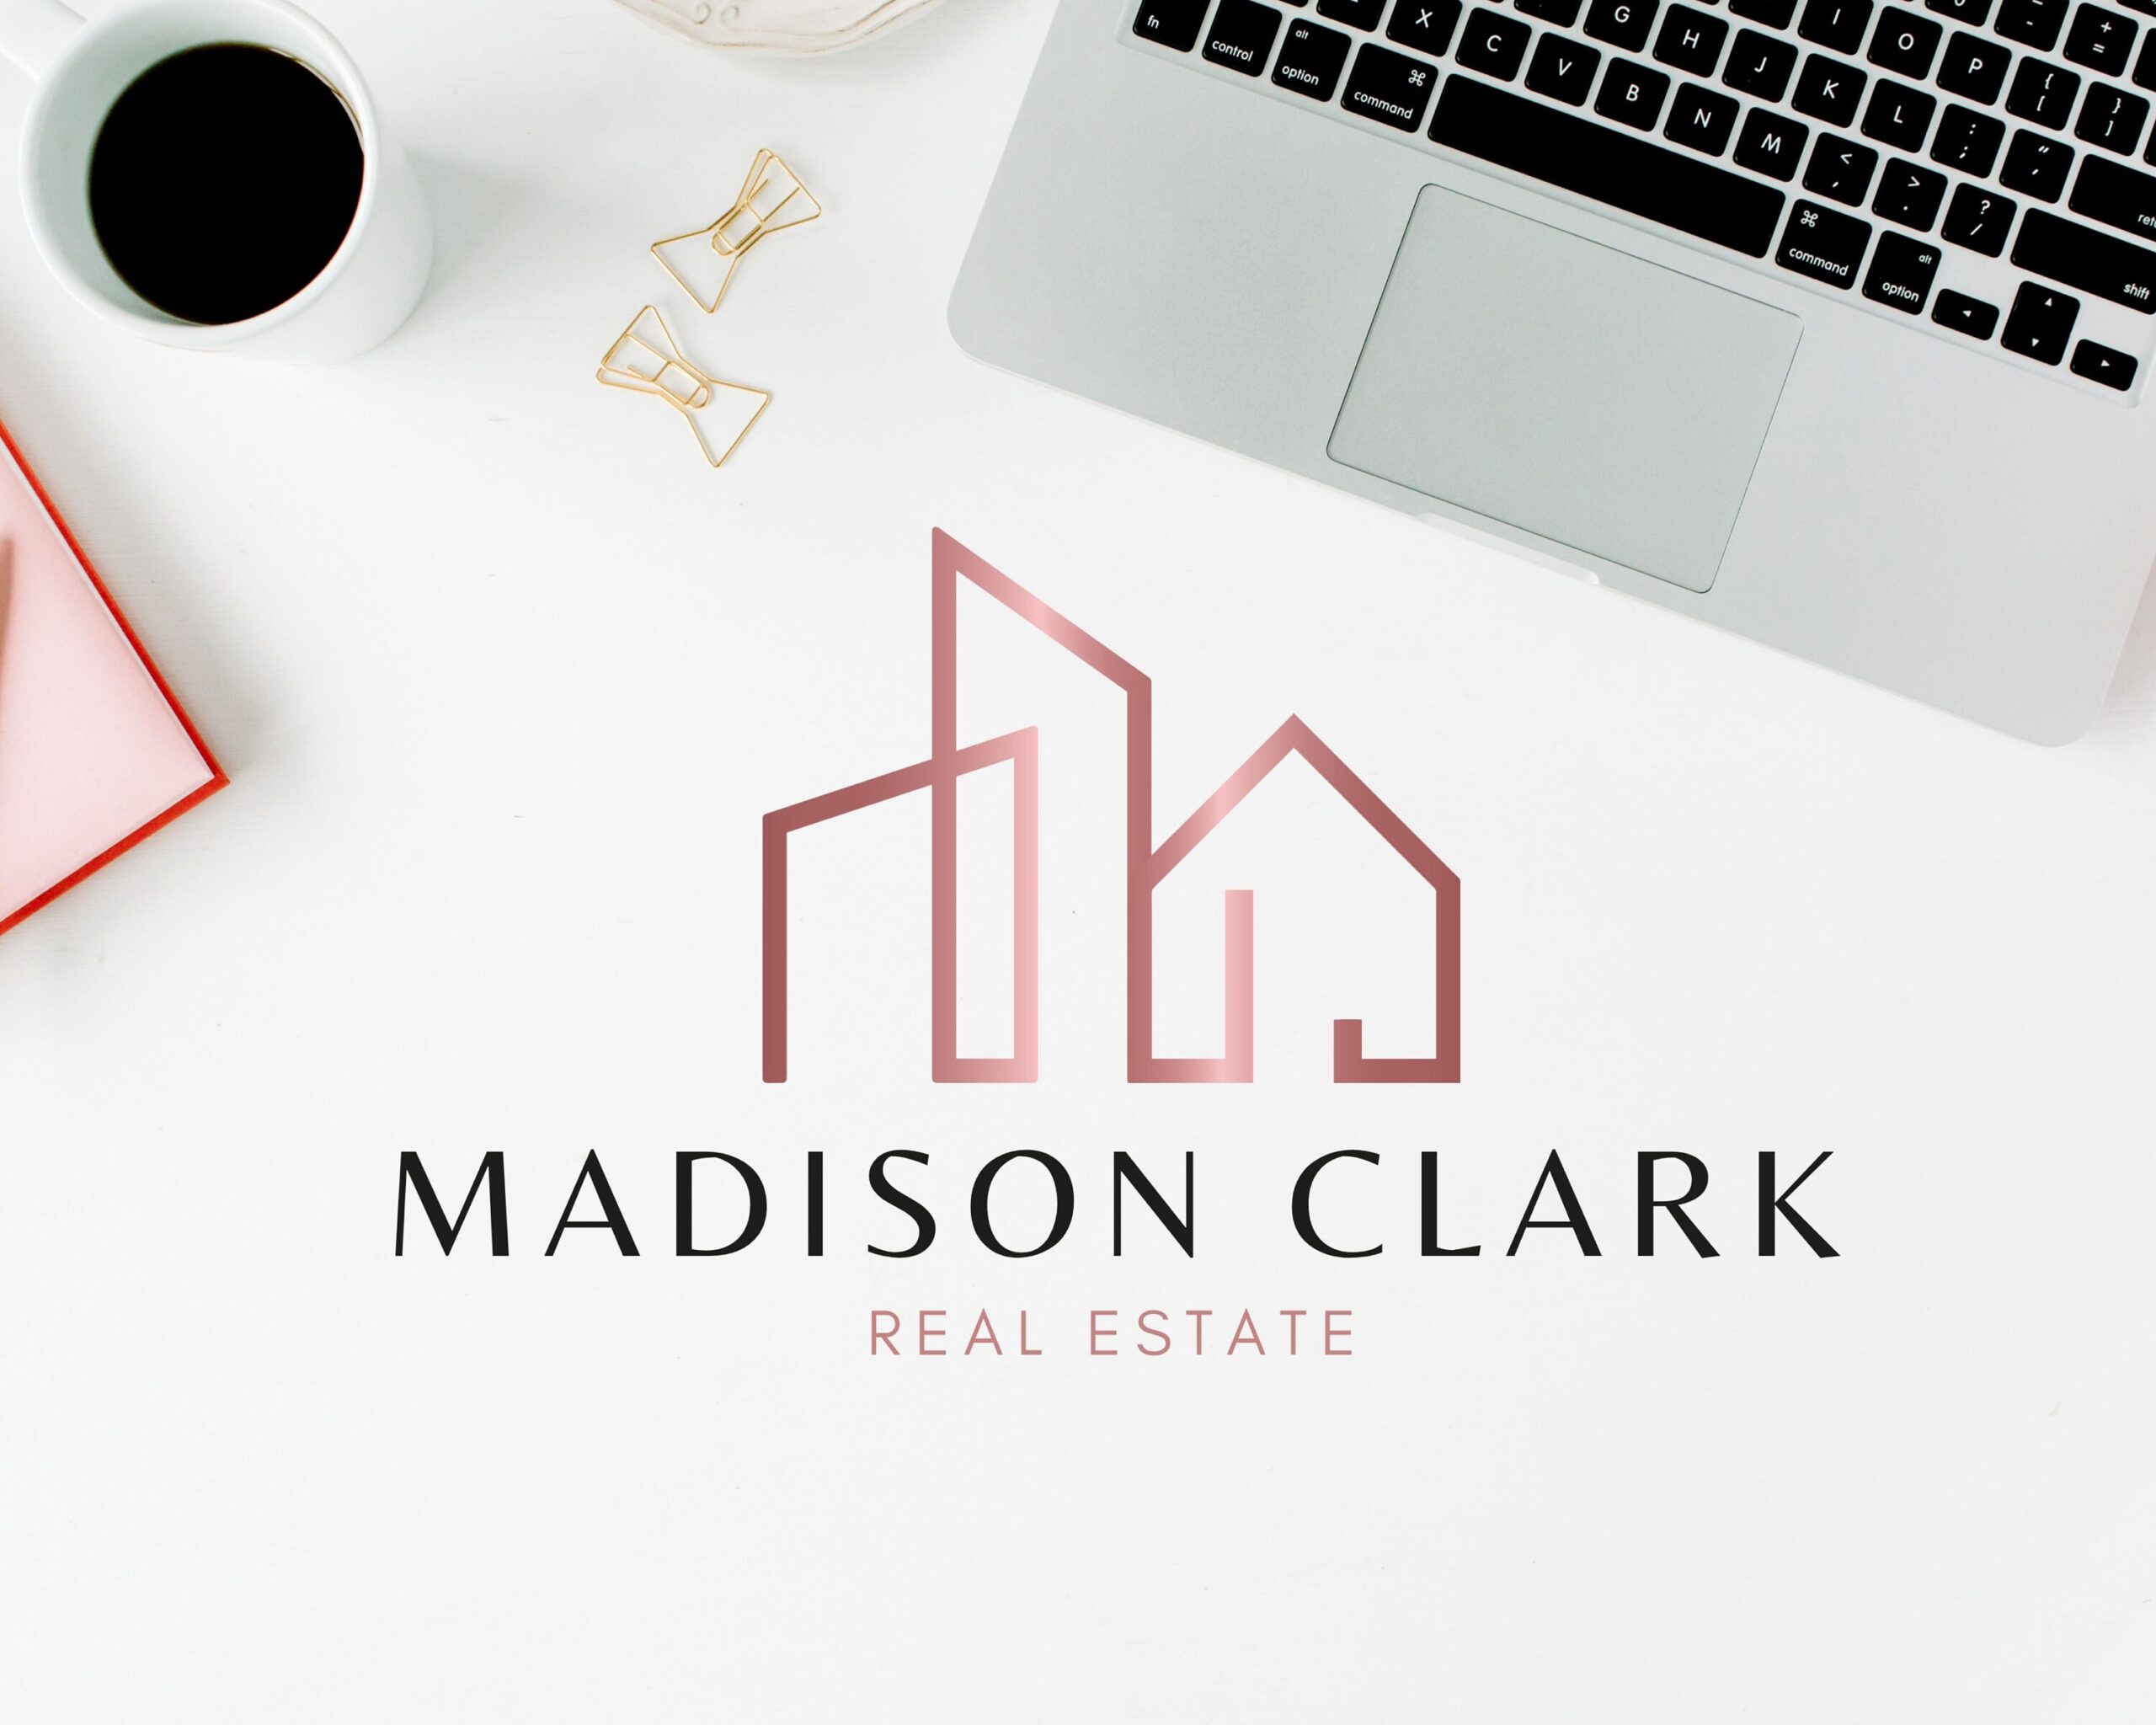 Real Estate Rose Gold Logo Design. I will design this logo with your business name and tagline. Professional Branding for Real Estate Agents